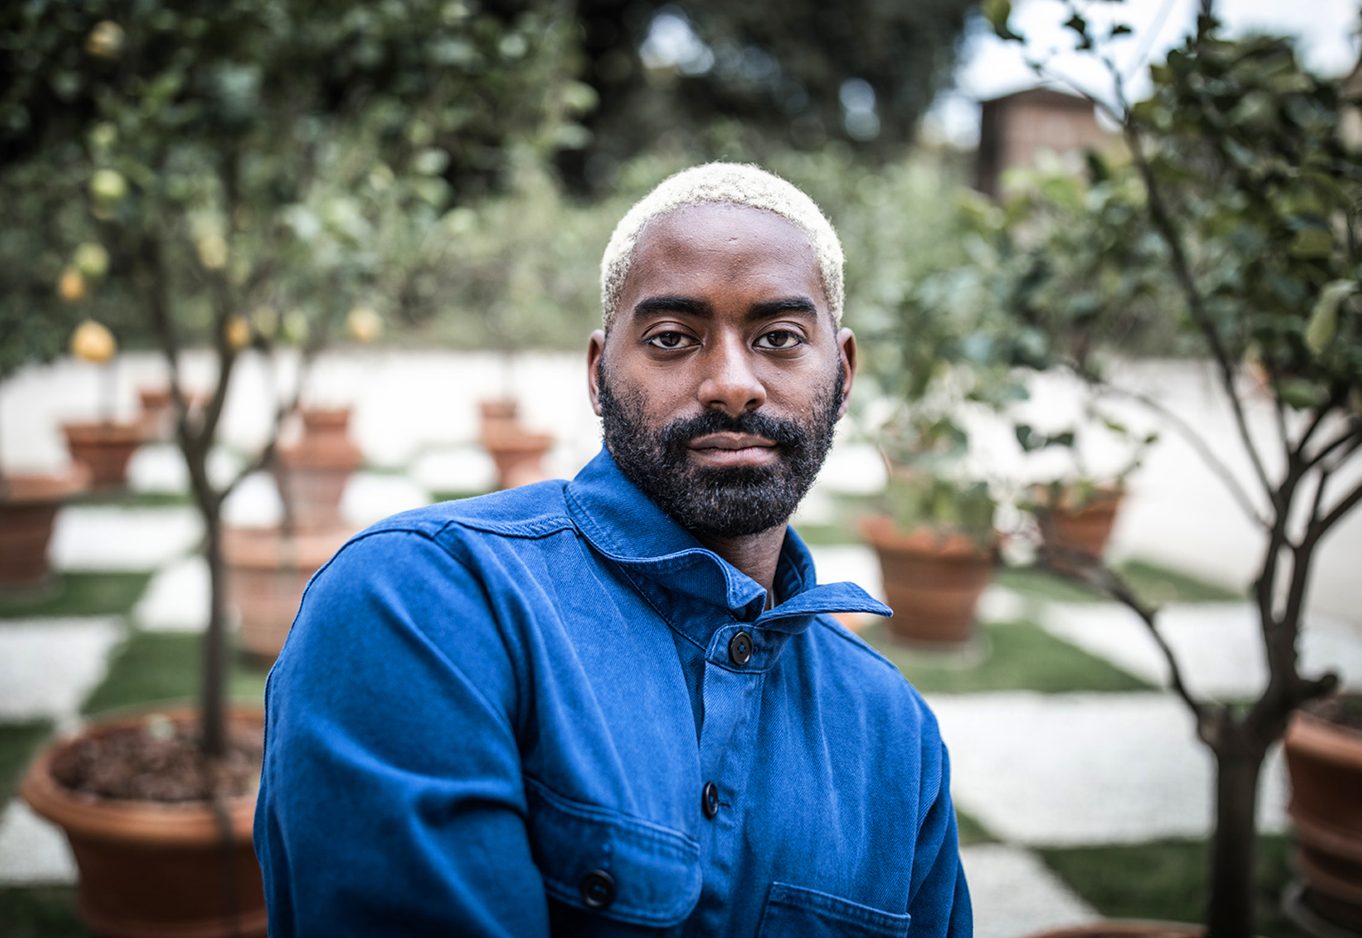 A portrait of Jerron Herman. He is an African American man with a salt and pepper beard and short, bleached hair. He is wearing a blue denim shirt with a pointed collar, sitting at an angle with foliage behind him.